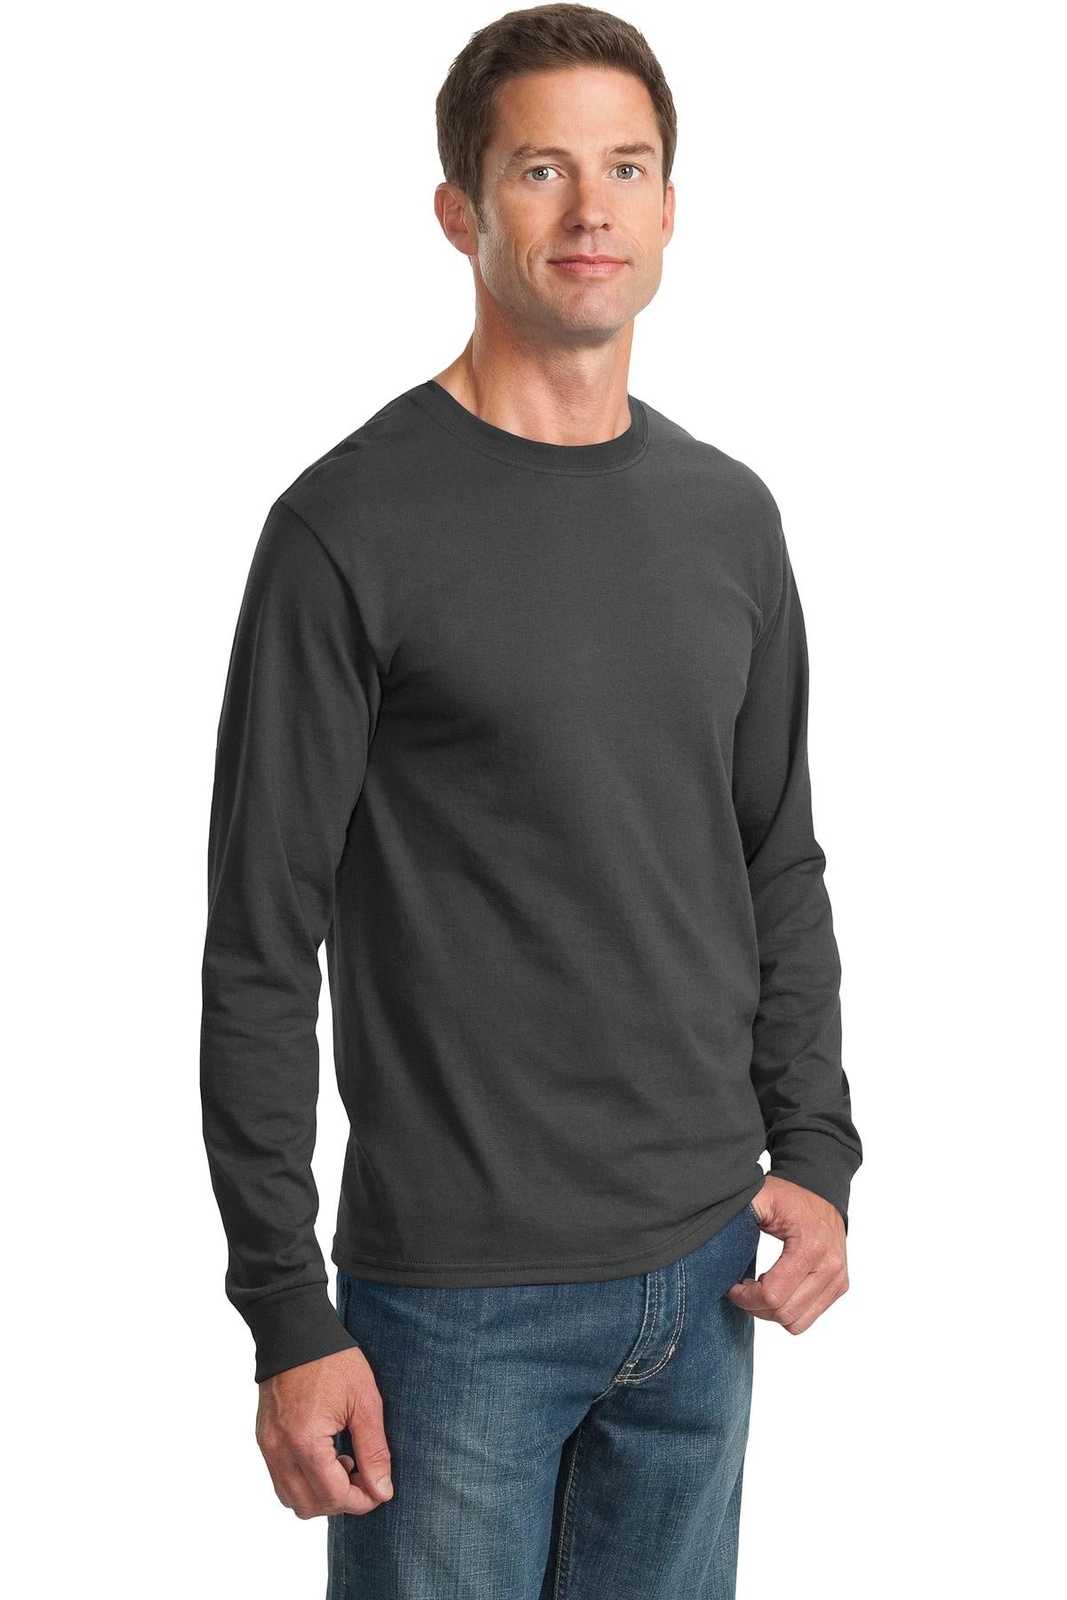 Jerzees 29LS Dri-Power 50/50 Cotton/Poly Long Sleeve T-Shirt - Charcoal Gray - HIT a Double